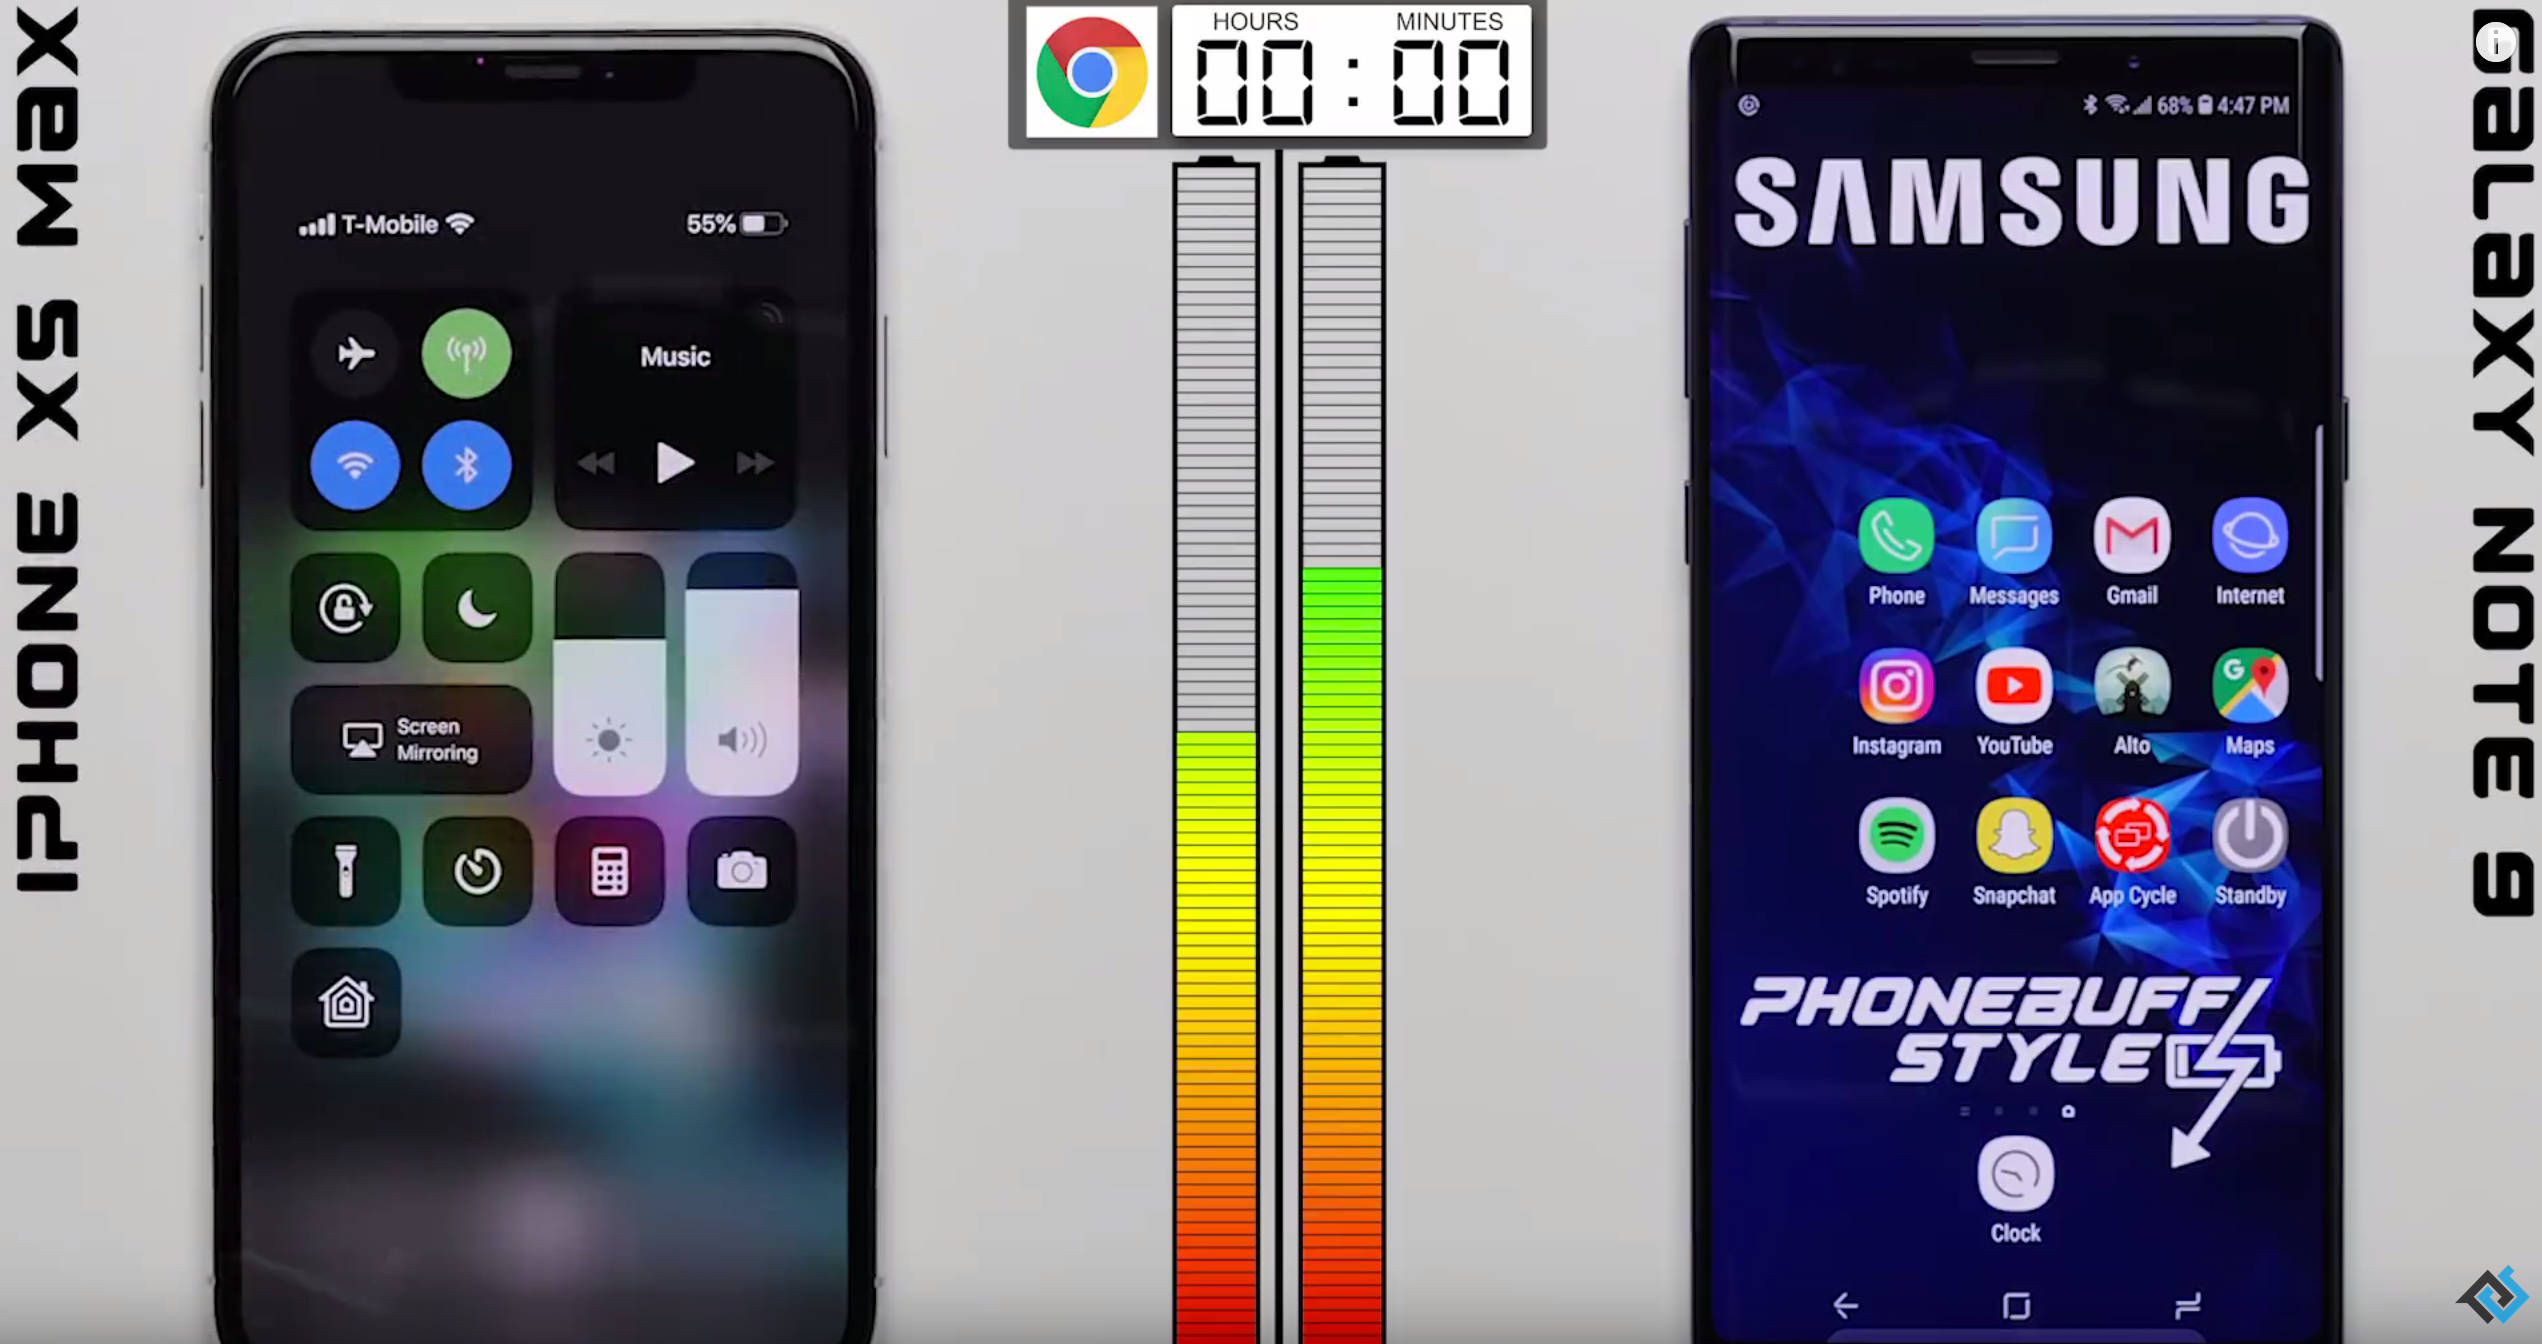 Iphone Xs Max Vs Samsung Galaxy Note 9 In A Professional Battery